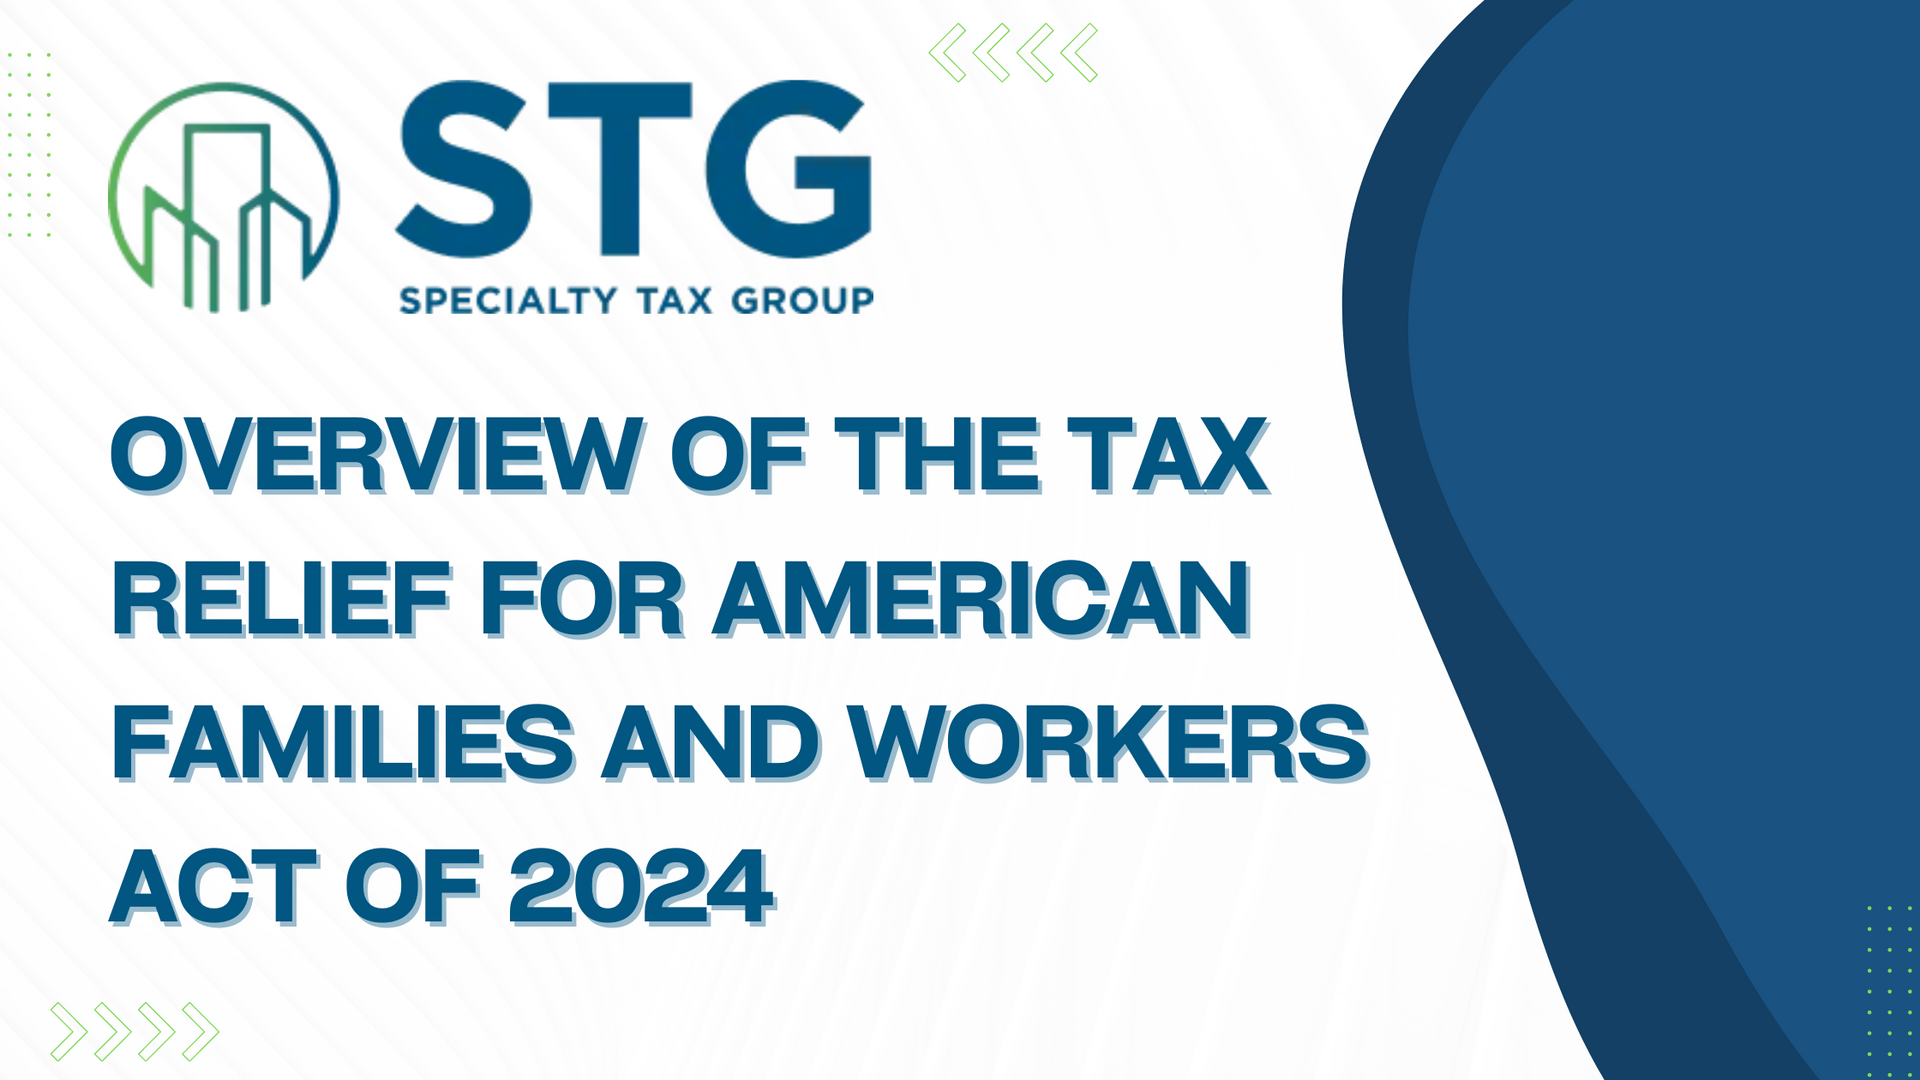 Proposed Bipartisan Tax Plan Released – Overview of the Tax
Relief for American Families and Workers Act of 2024